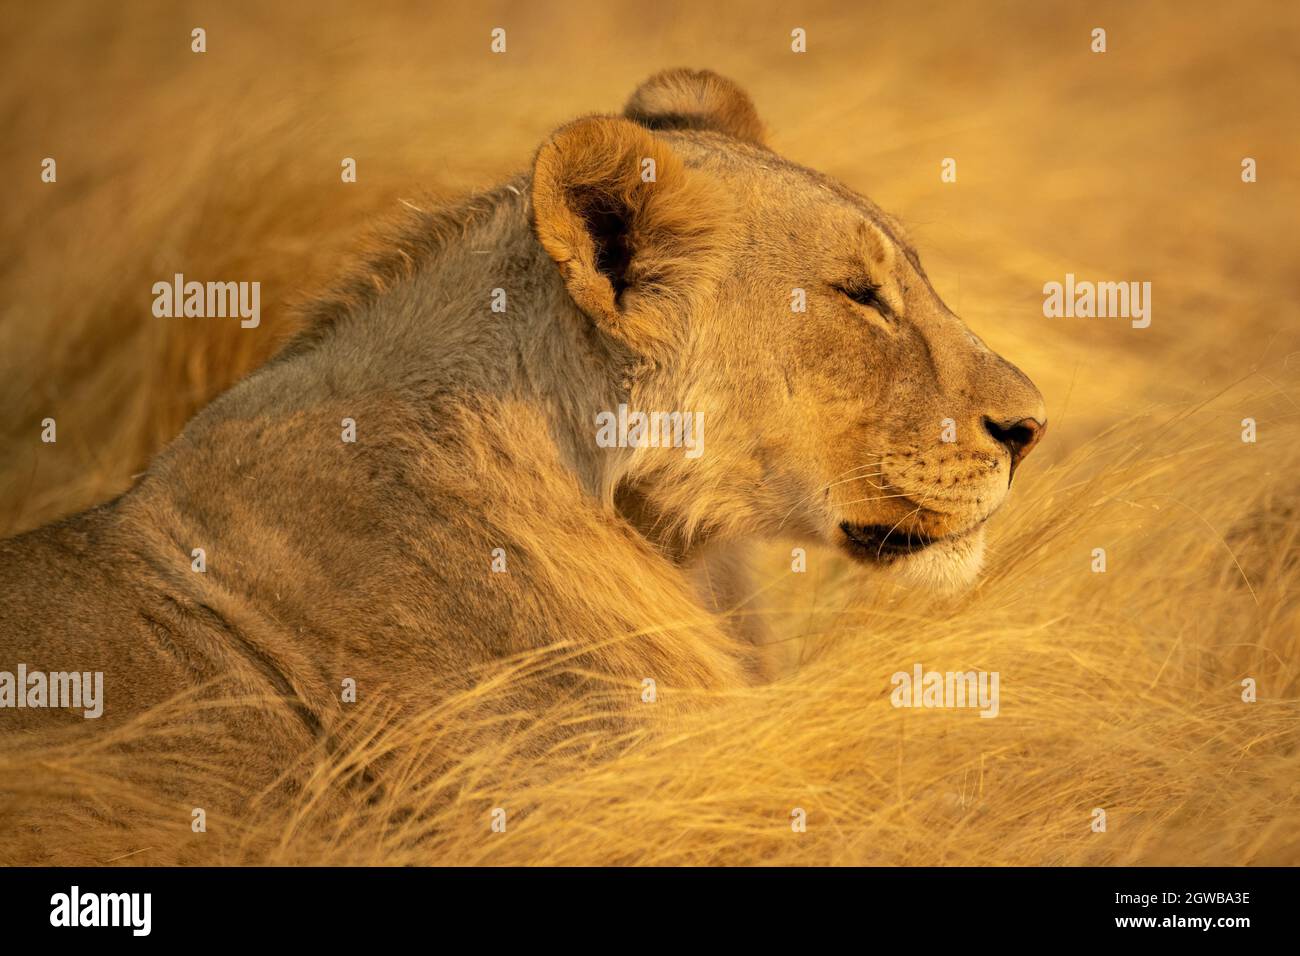 Close-up Of Lioness Lying In Dry Grass Stock Photo